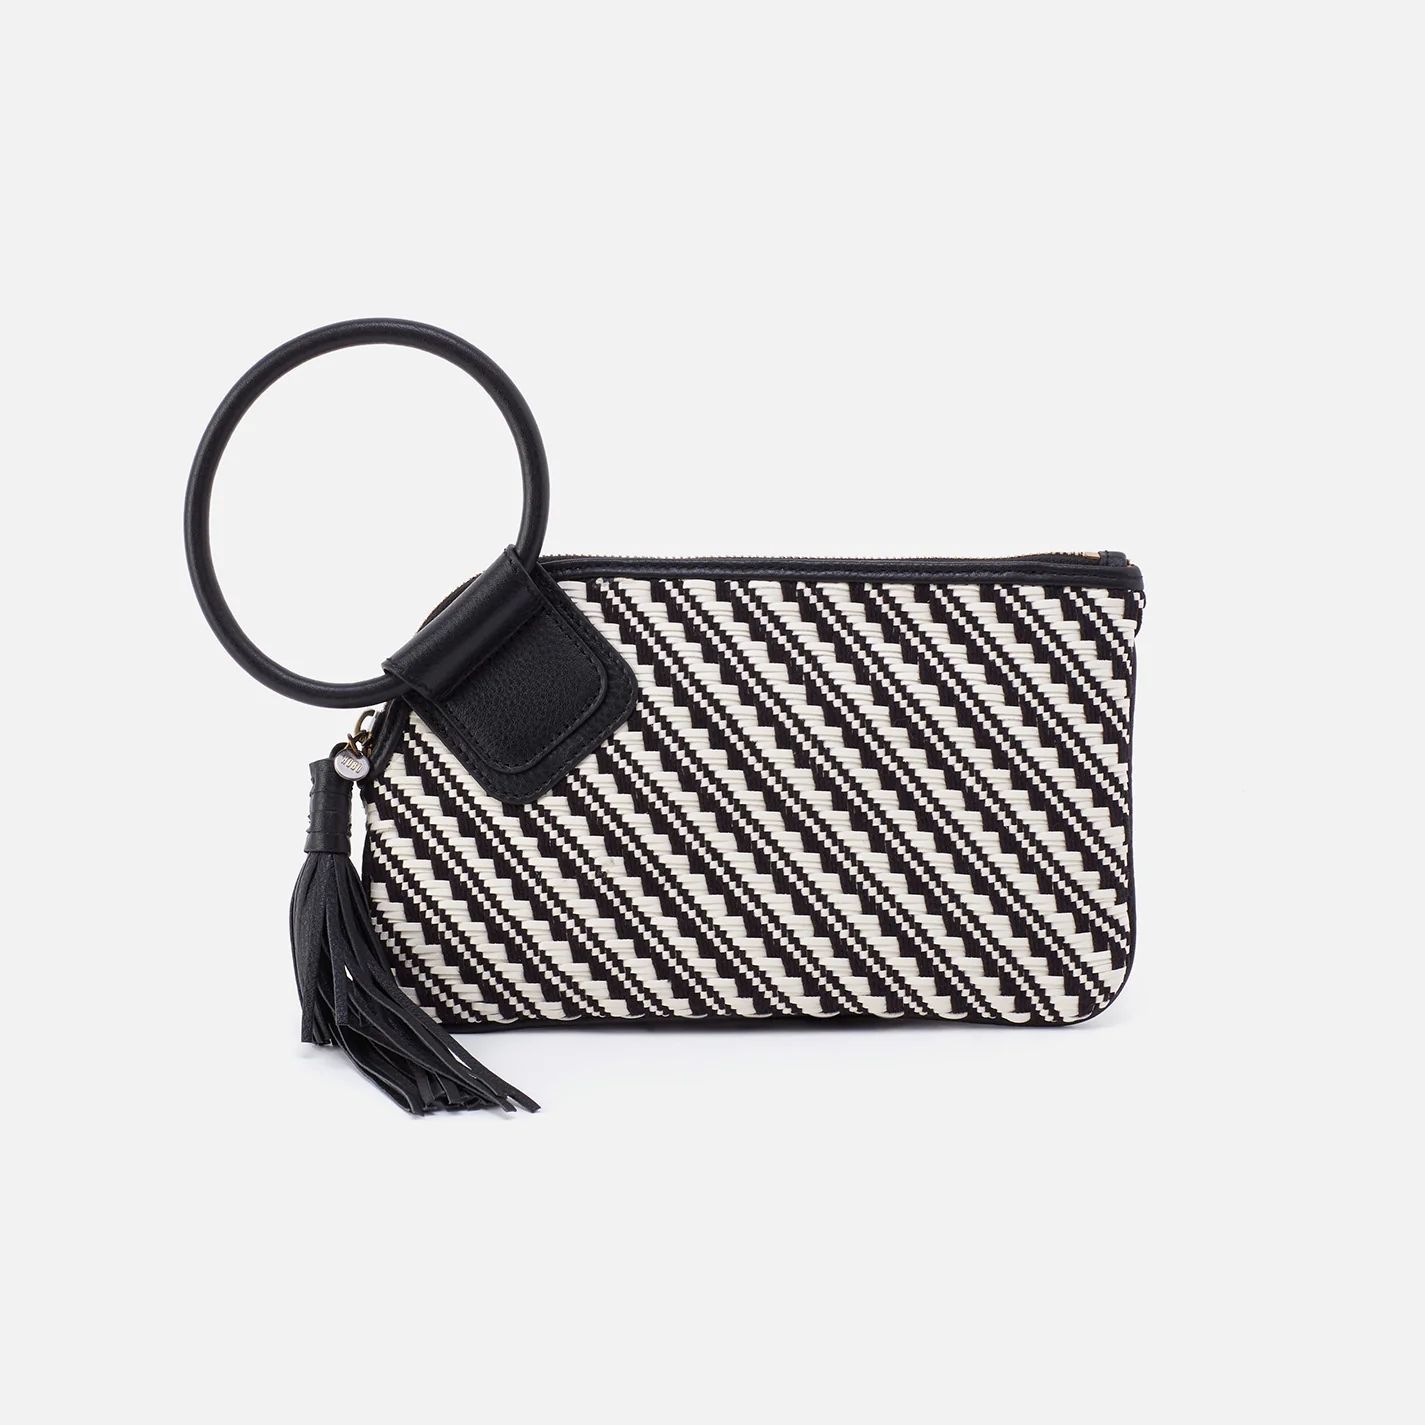 Sable Wristlet in Artisan Weave - Black and White | HOBO Bags